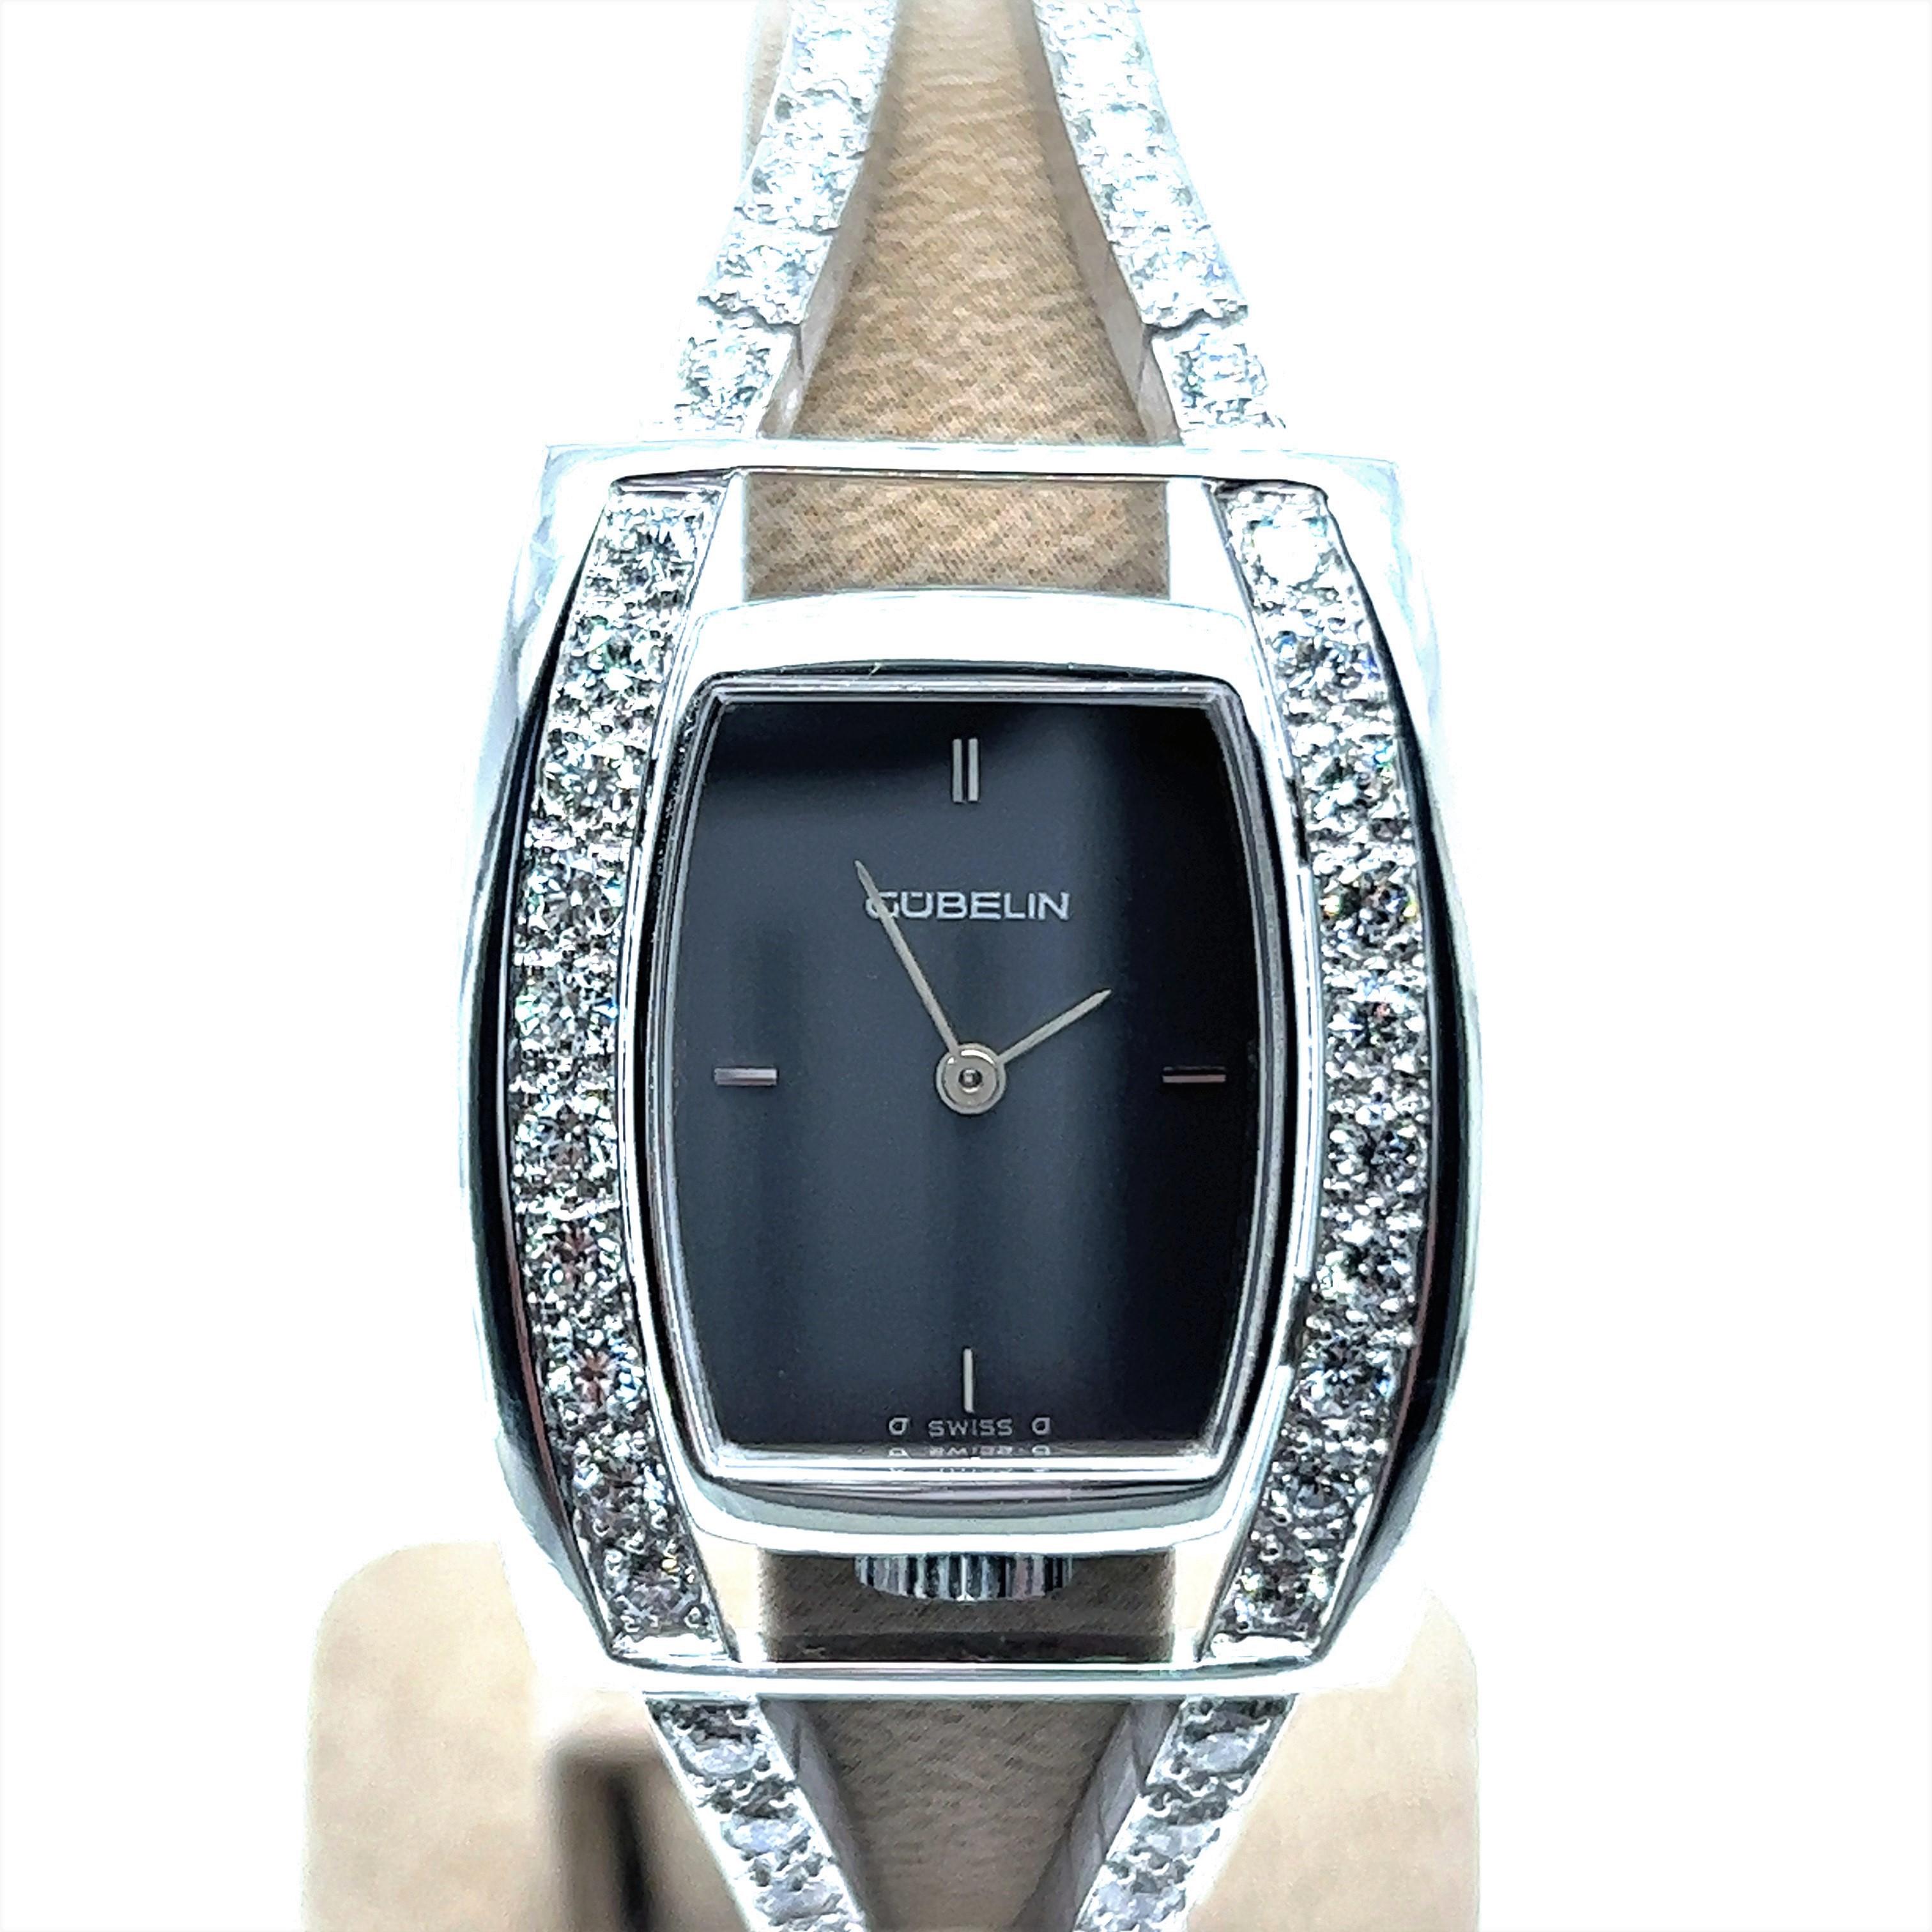 Designed as two parting rivière bracelets embracing the tonneau shaped case. Case and strap both crafted in 18 karat white gold. Set in two lines with 48 full brilliant-cut diamonds of 1.92 cts total weight. Fine G/H-vvs quality. Attractive